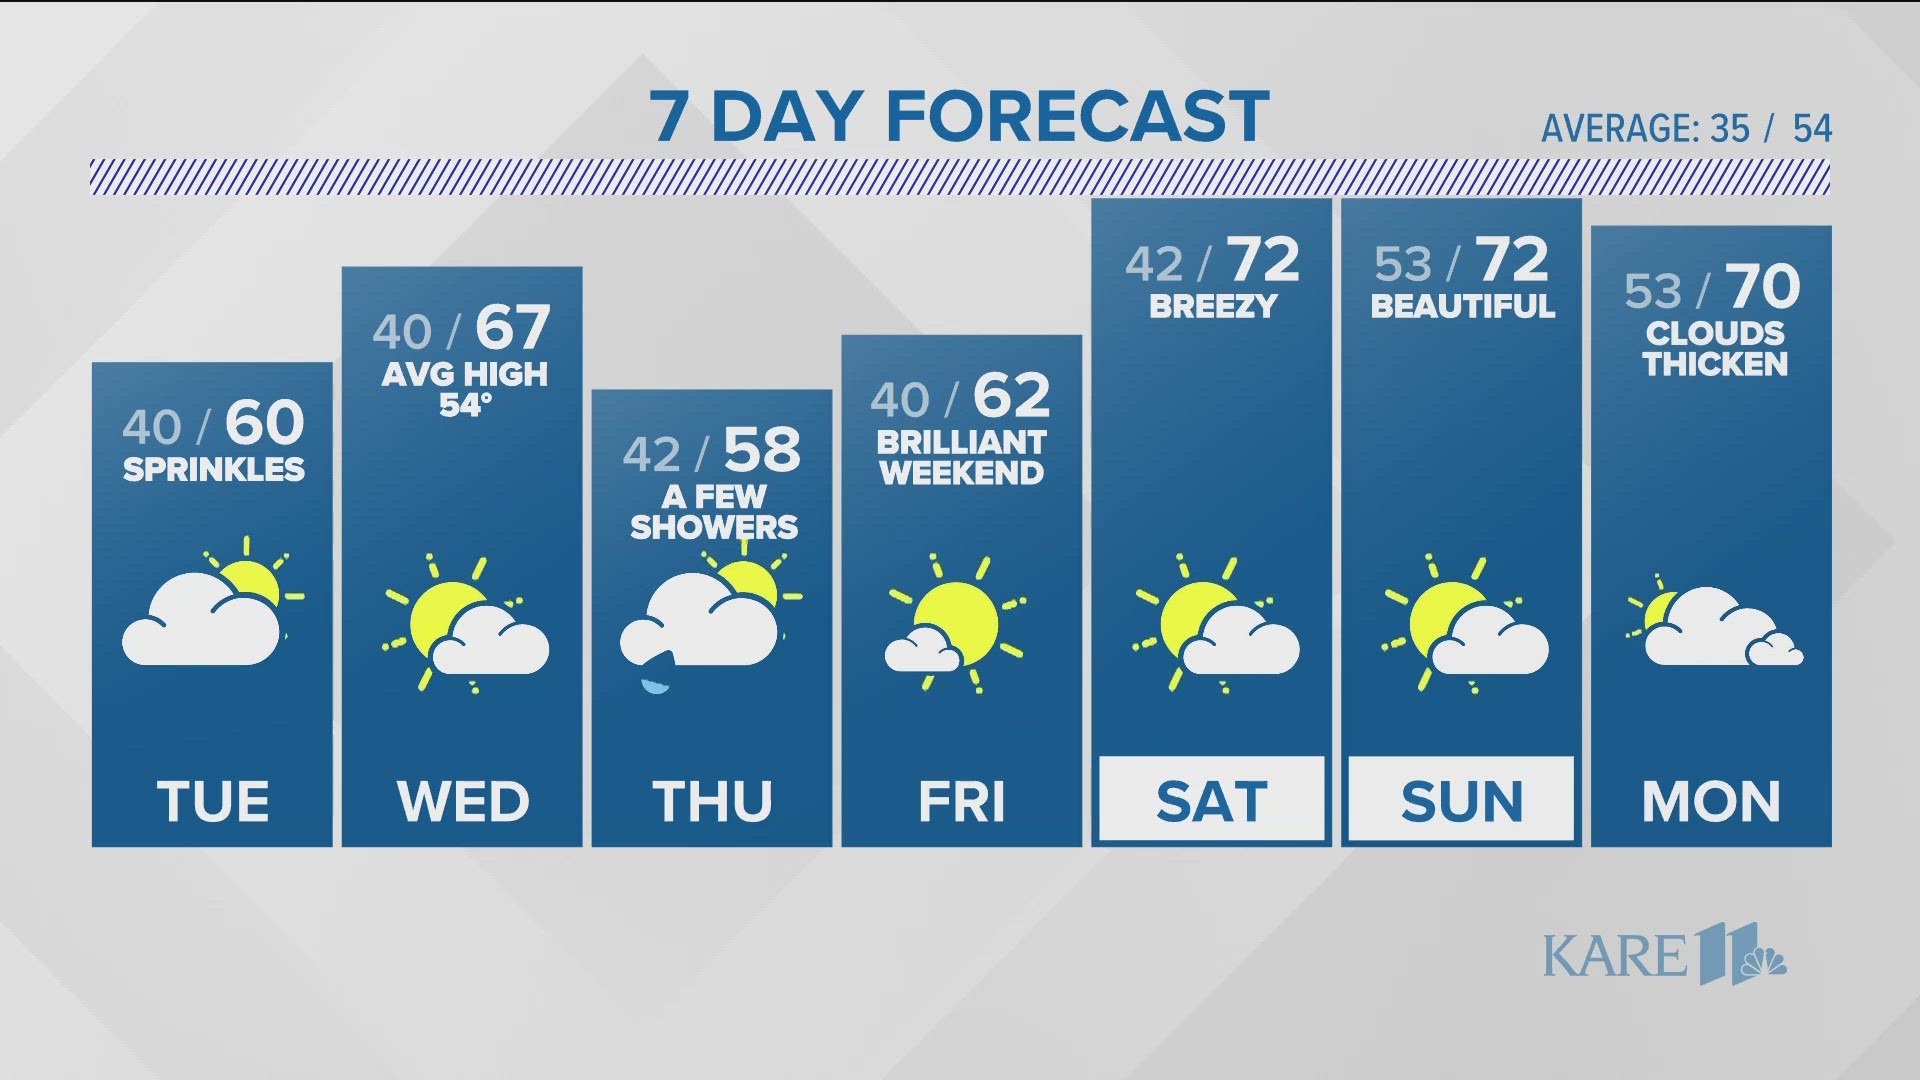 Sunny breaks Tuesday with a few sprinkles.